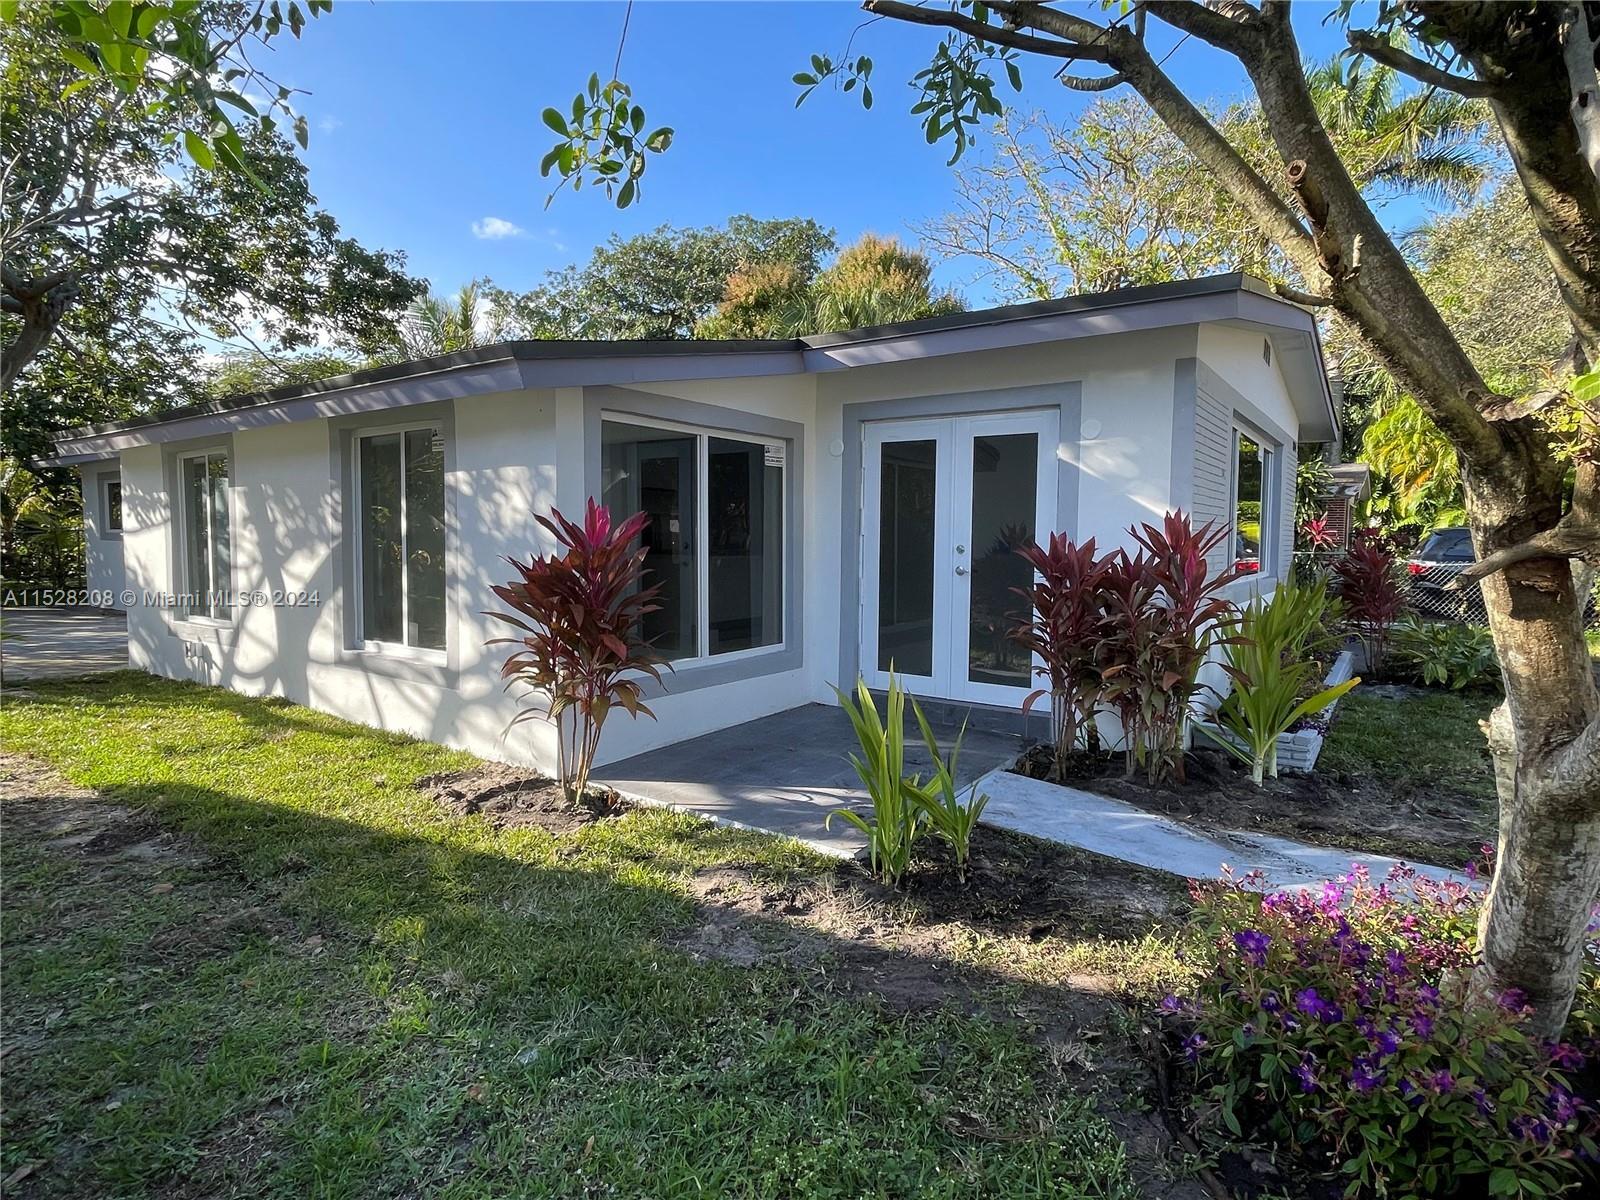 Photo of 814 S 26th Ave in Hollywood, FL